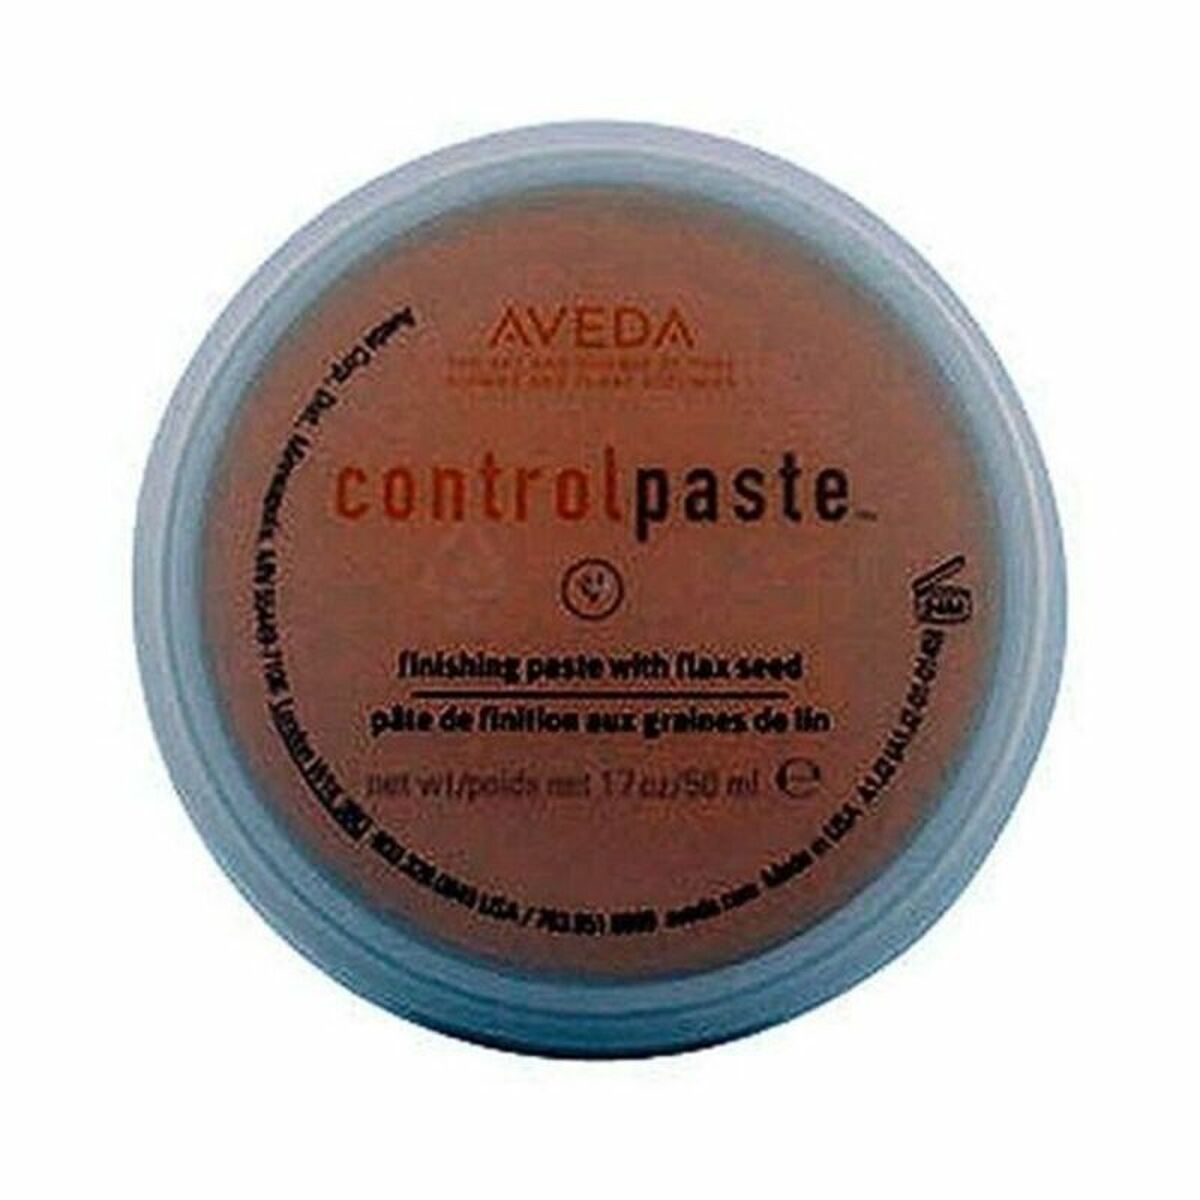 Moulding Lotion Control Paste Aveda (75 ml)-0